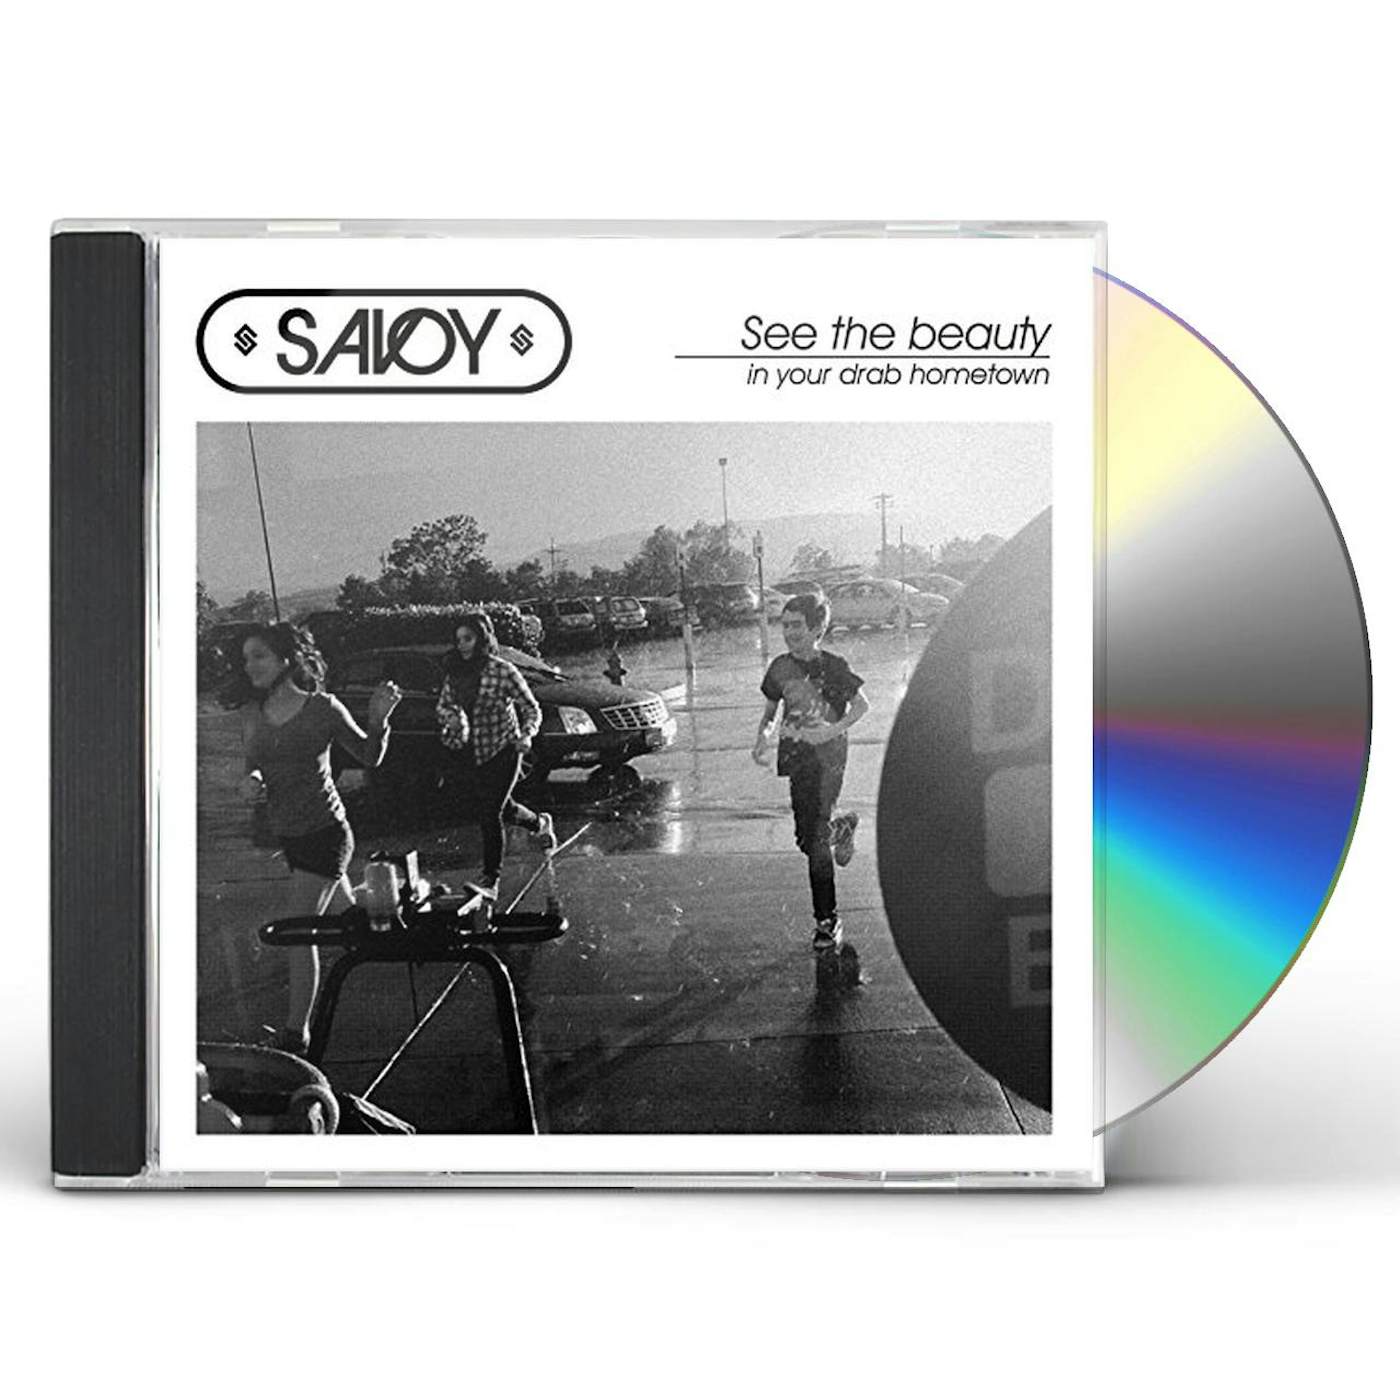 Savoy SEE THE BEAUTY IN YOUR DRAB HOMETOWN CD